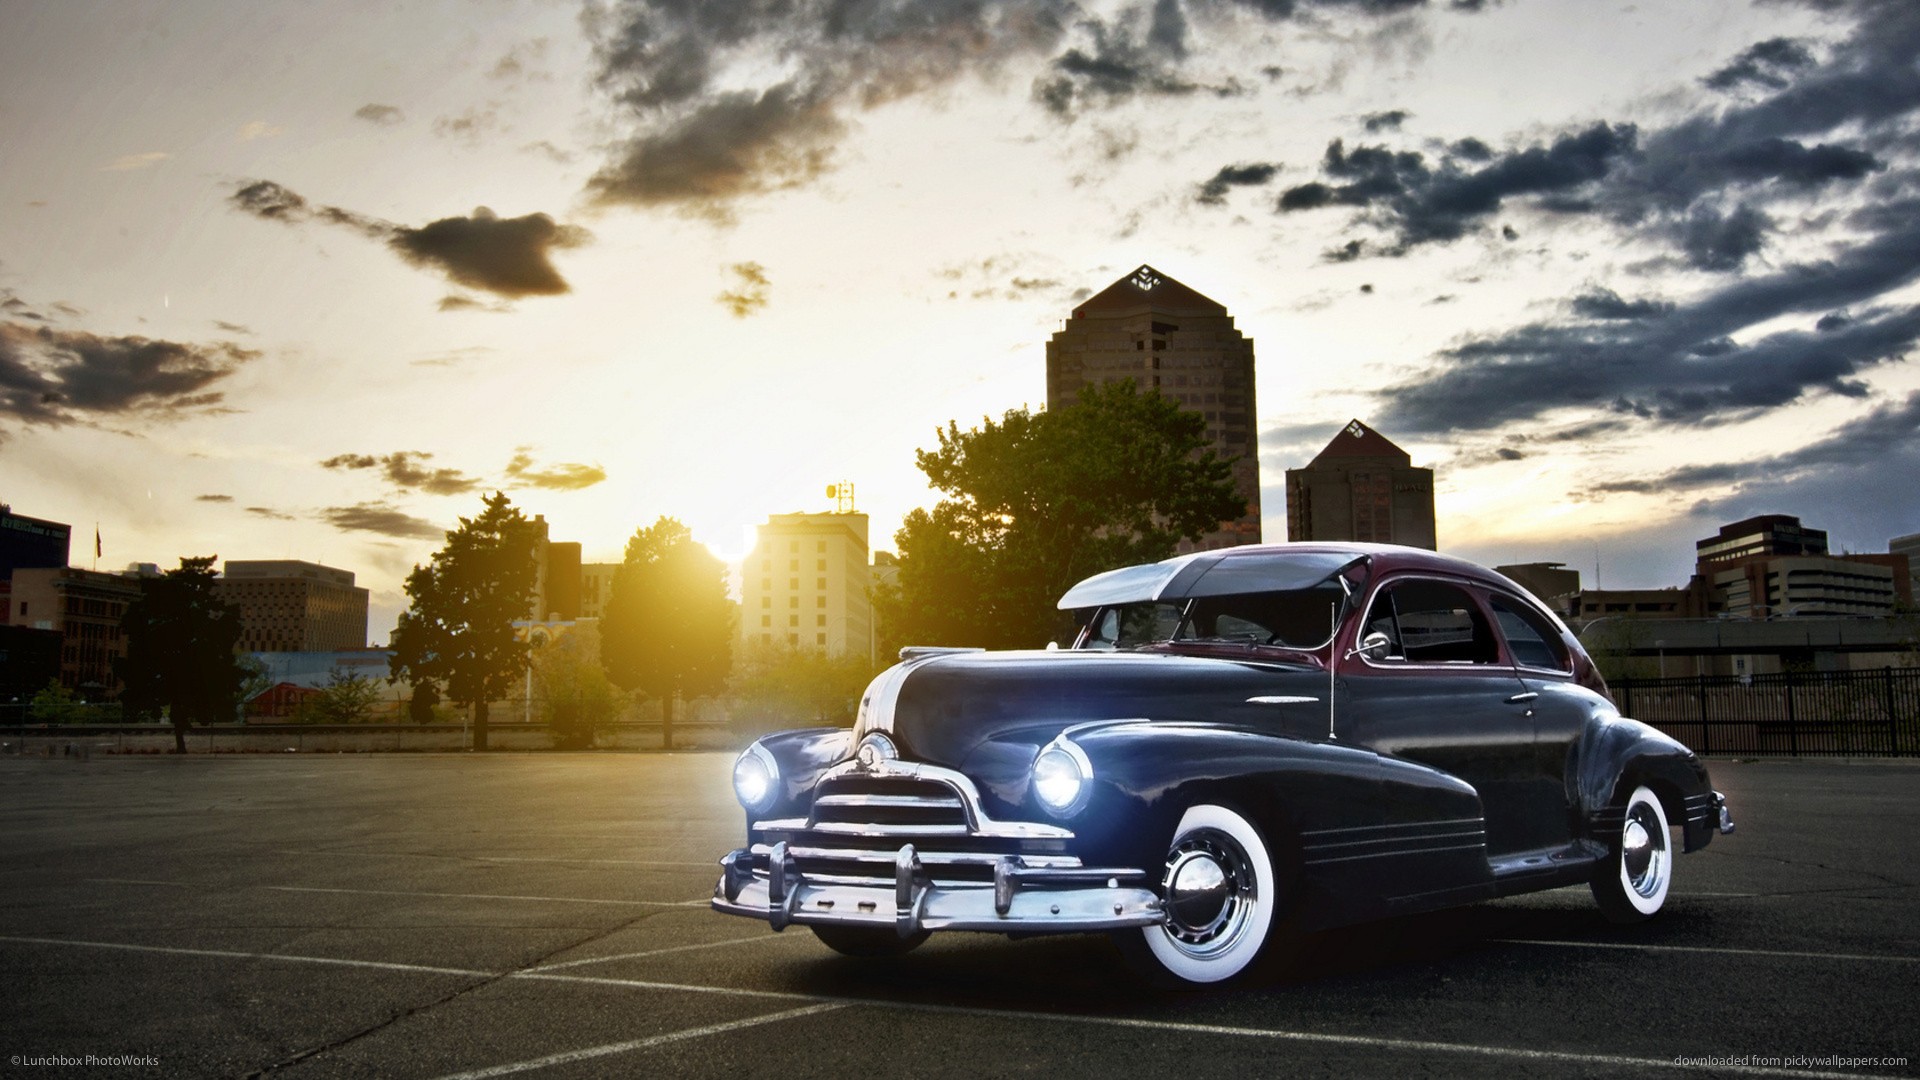 retro, Classic, Cars, Buildings, Cities, Sunset, Sky, Clouds Wallpaper